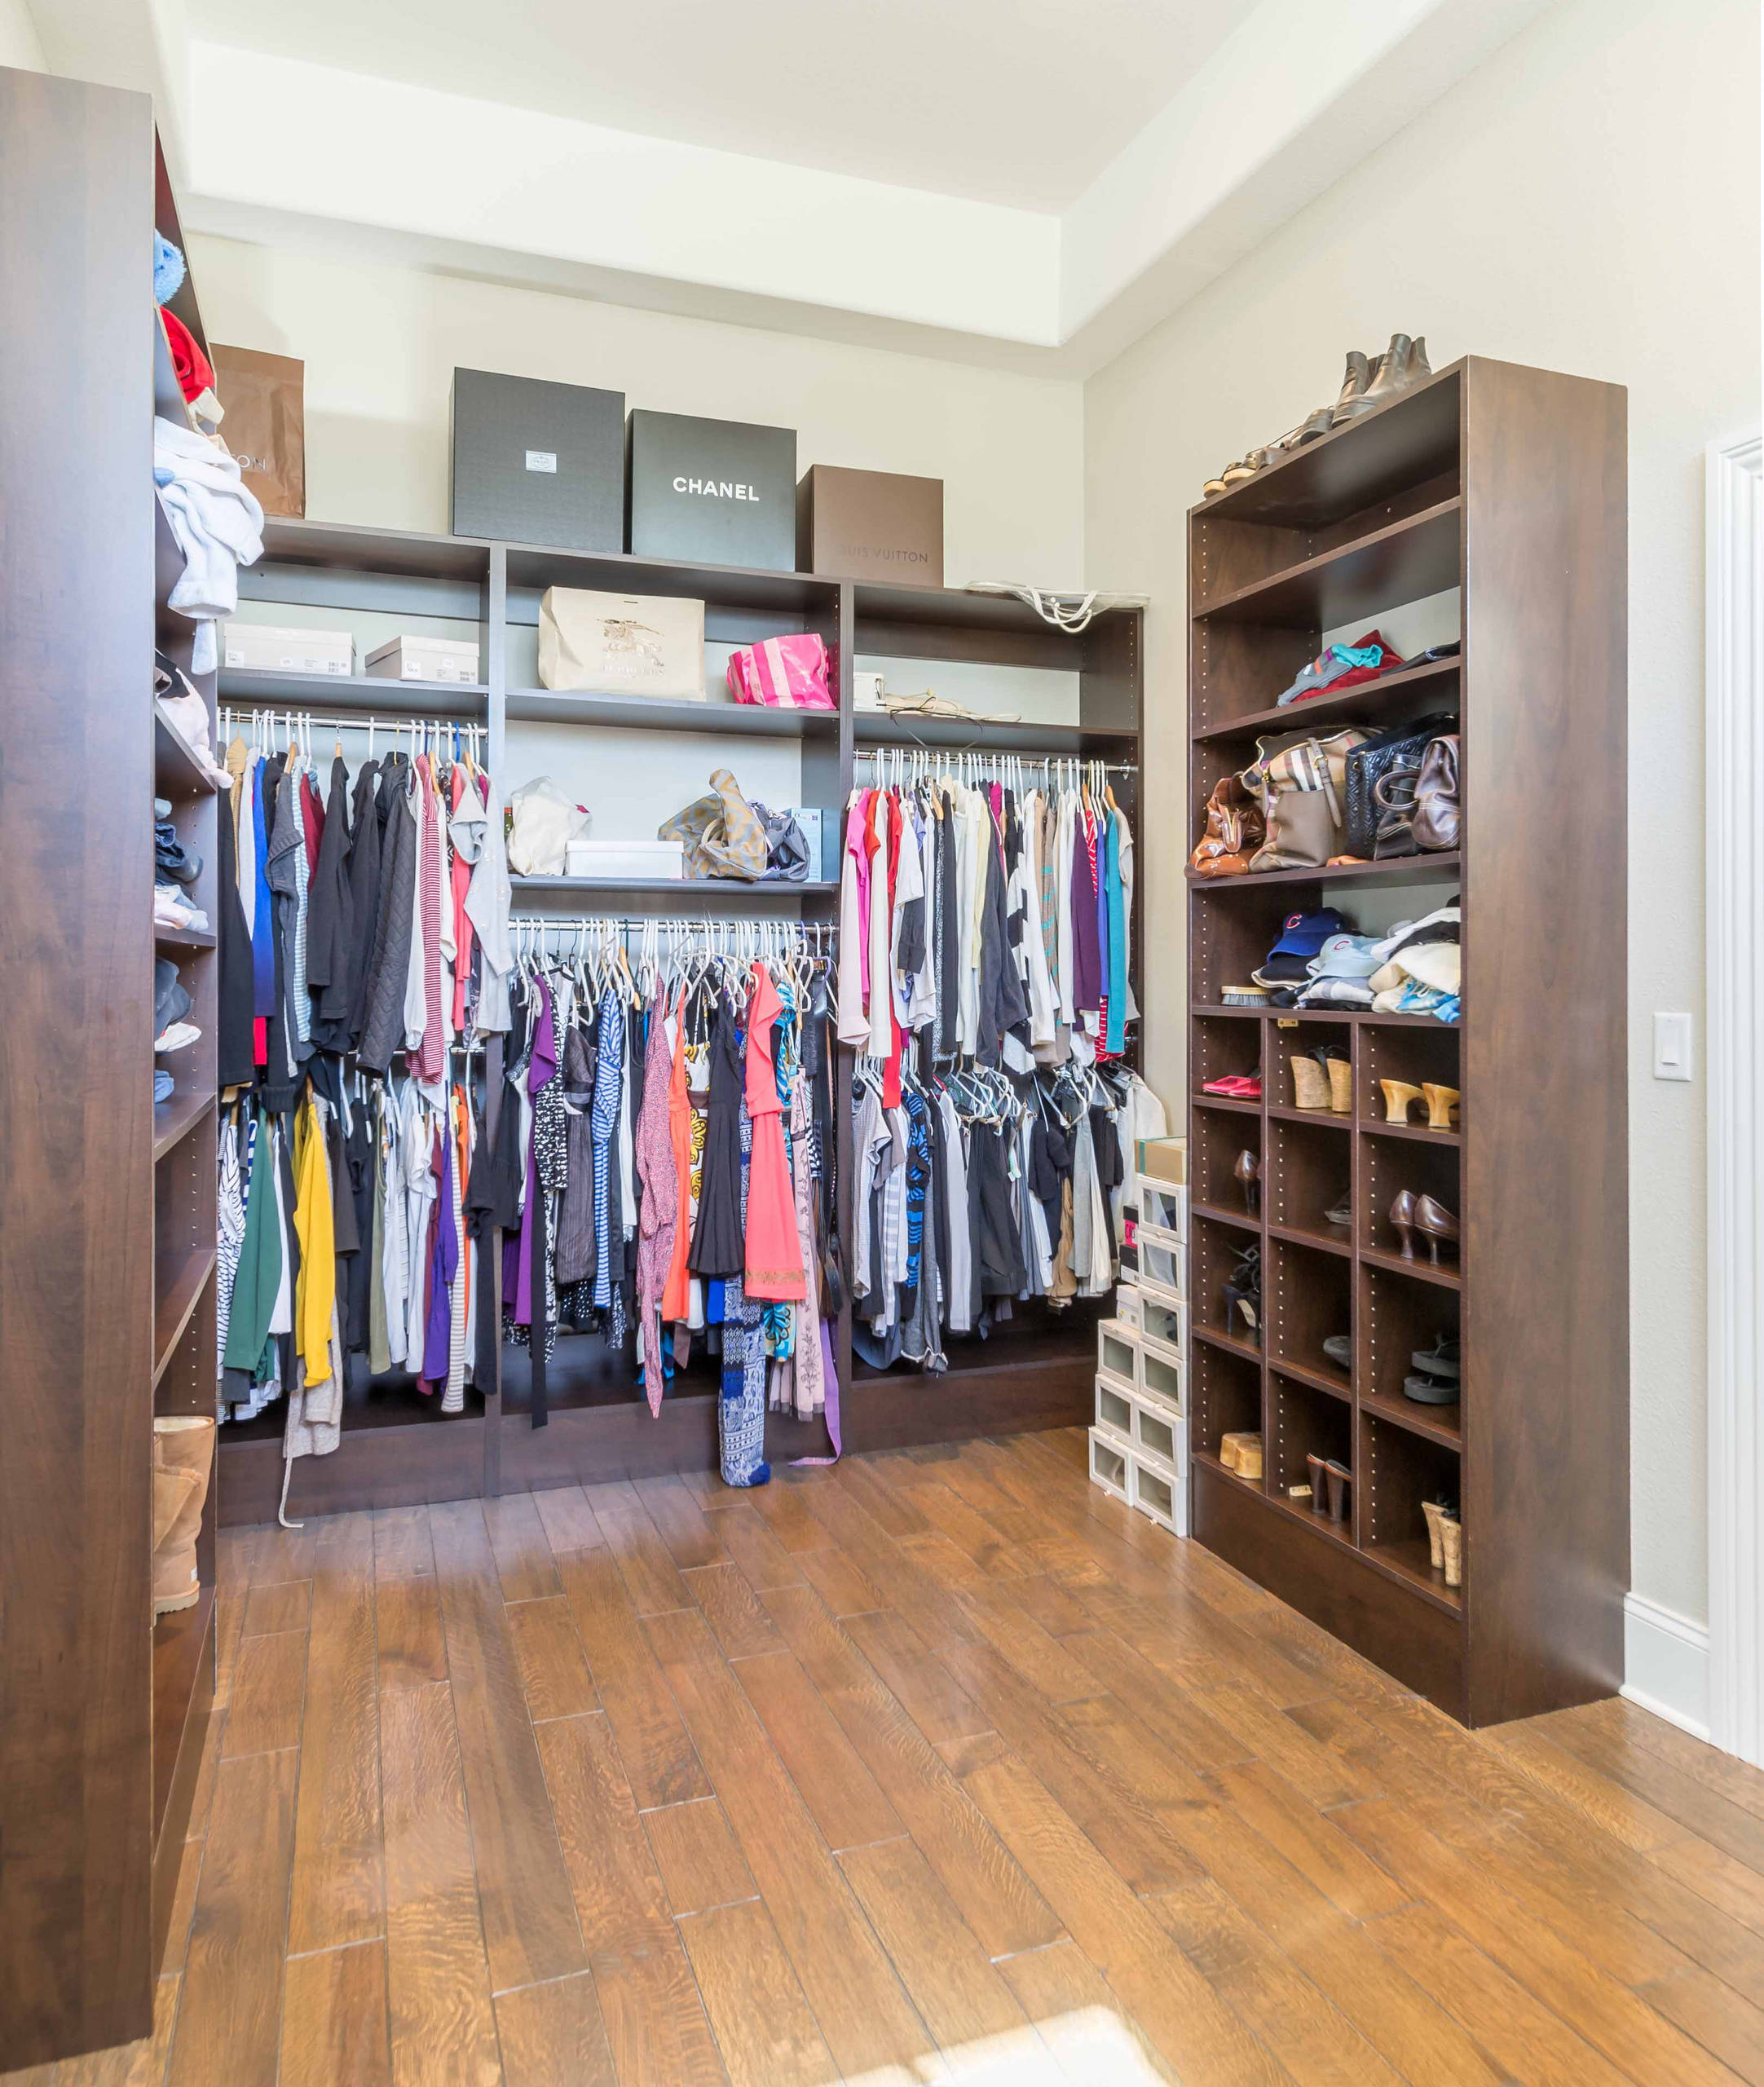 75 Tray Ceiling Walk-In Closet Ideas You'll Love - September, 2022 | Houzz